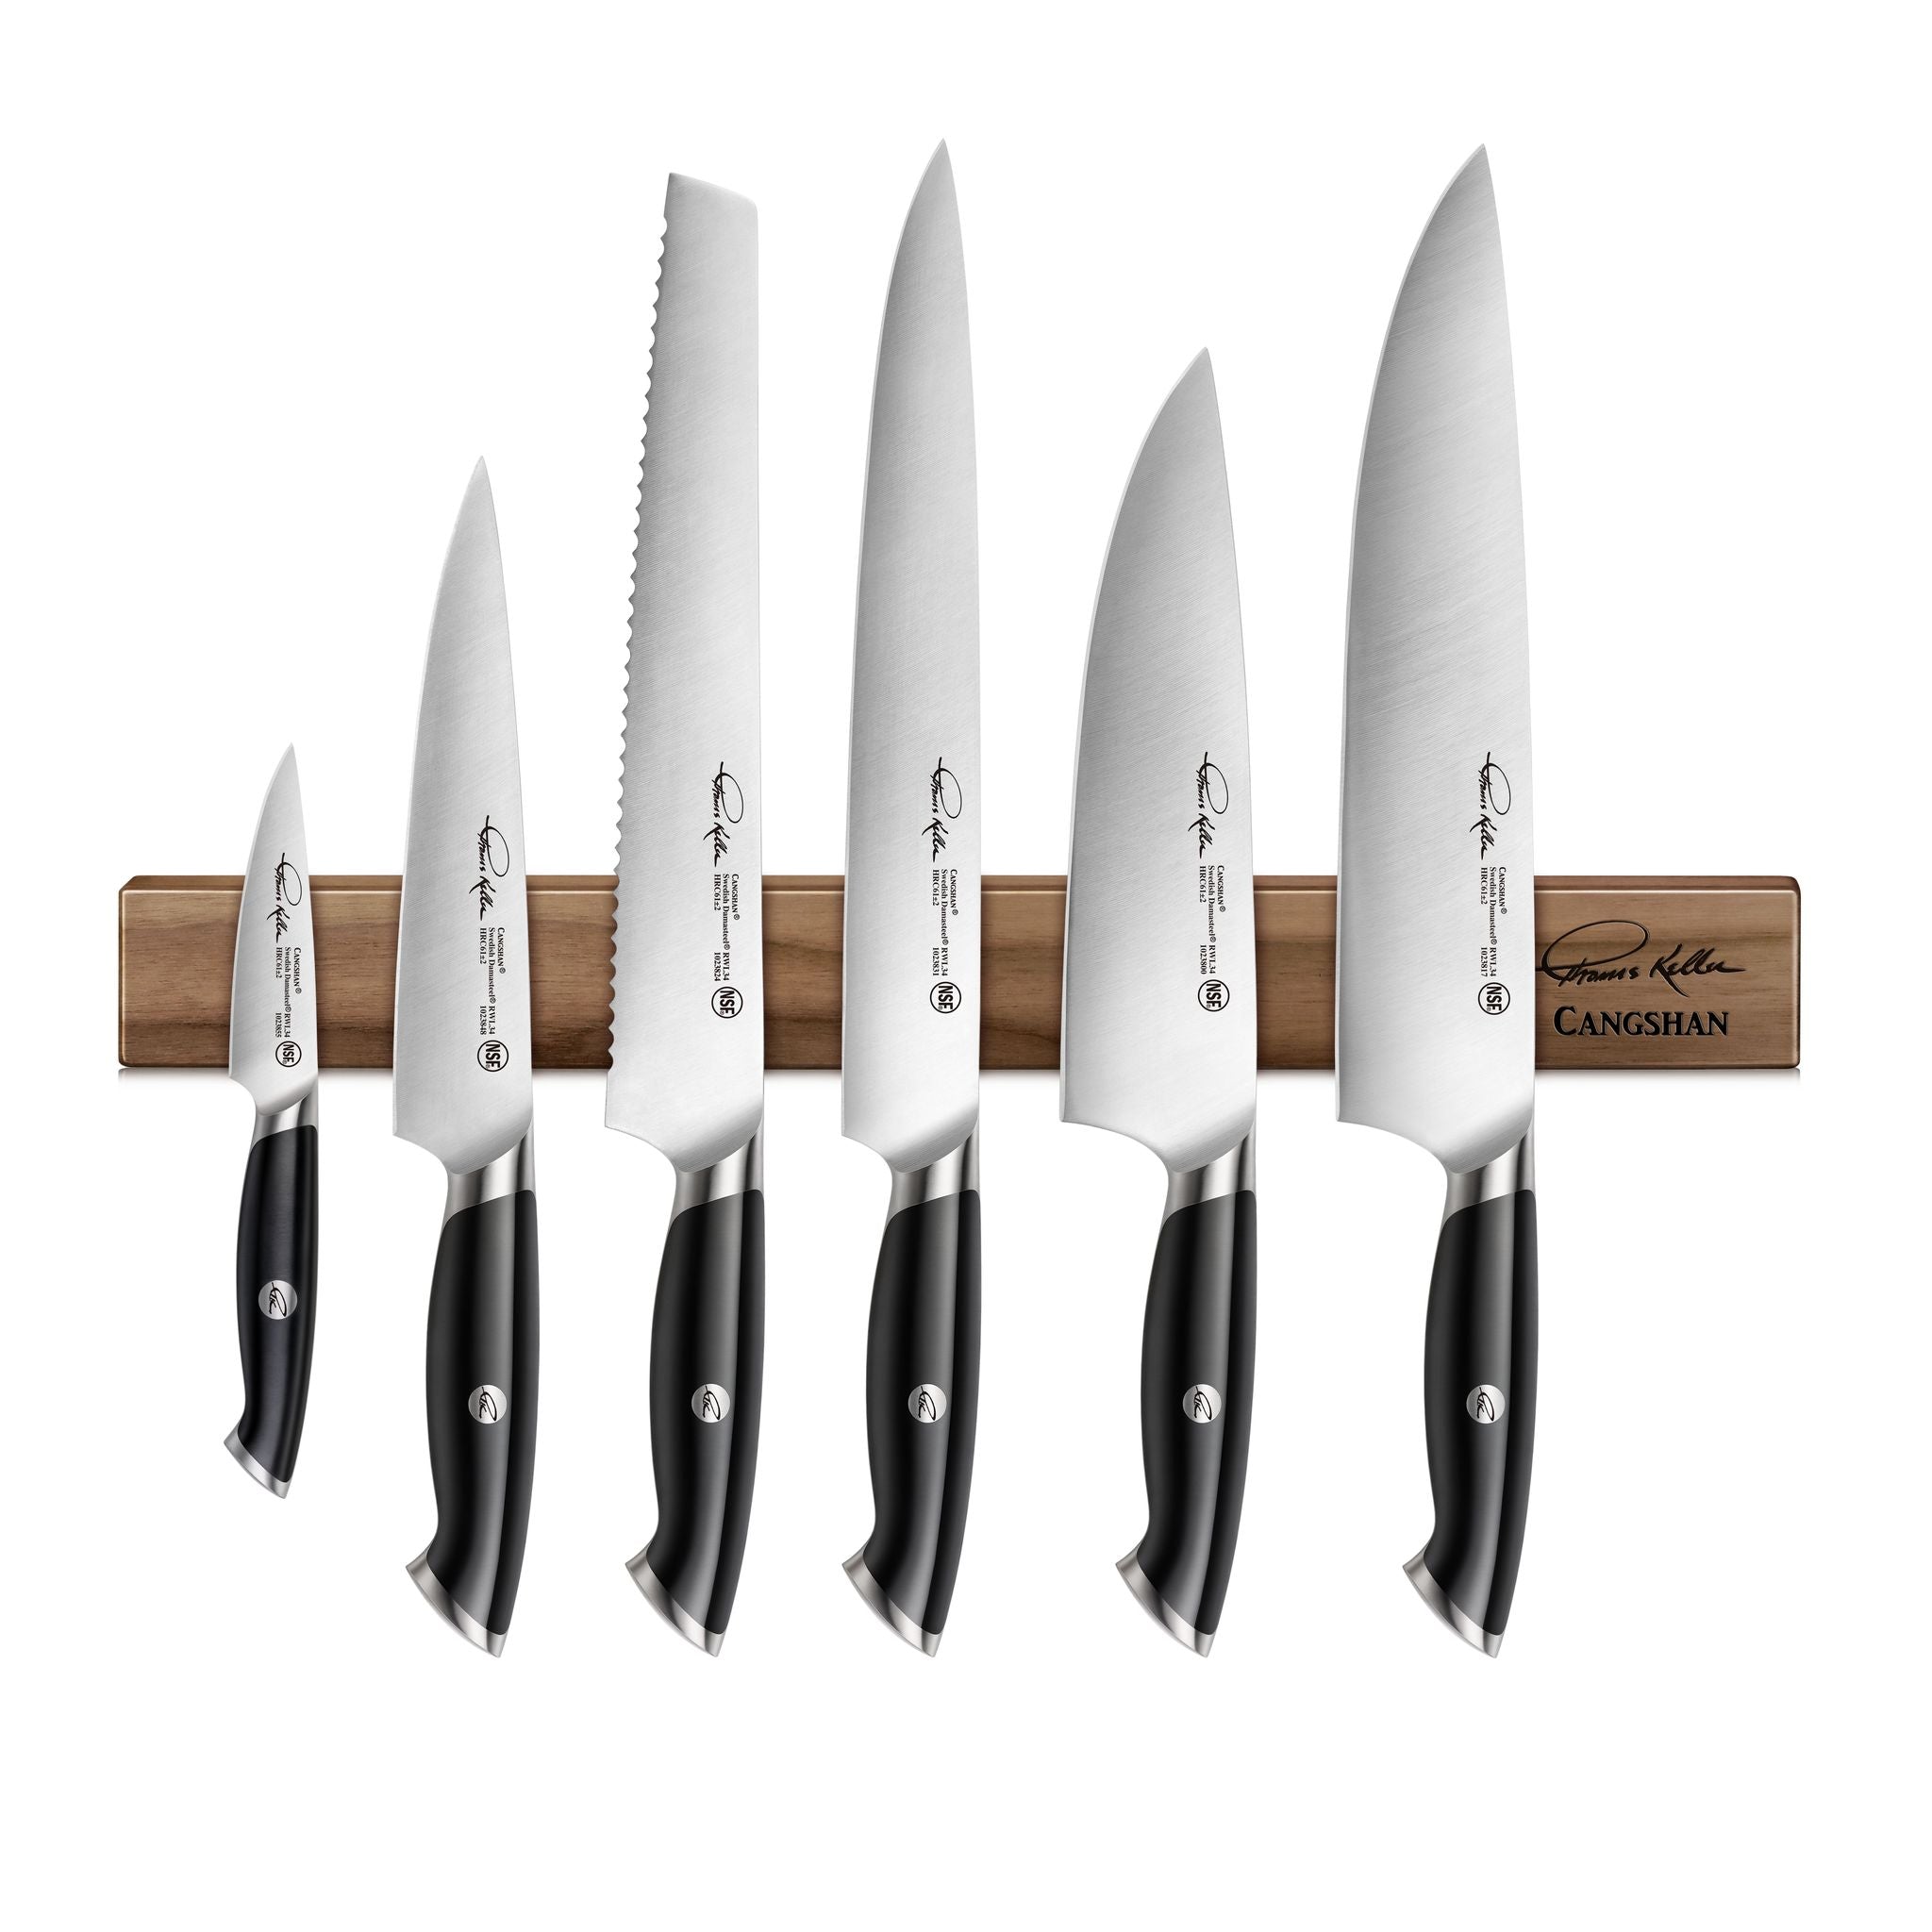 Thomas Keller Signature Collection by Cangshan - The French